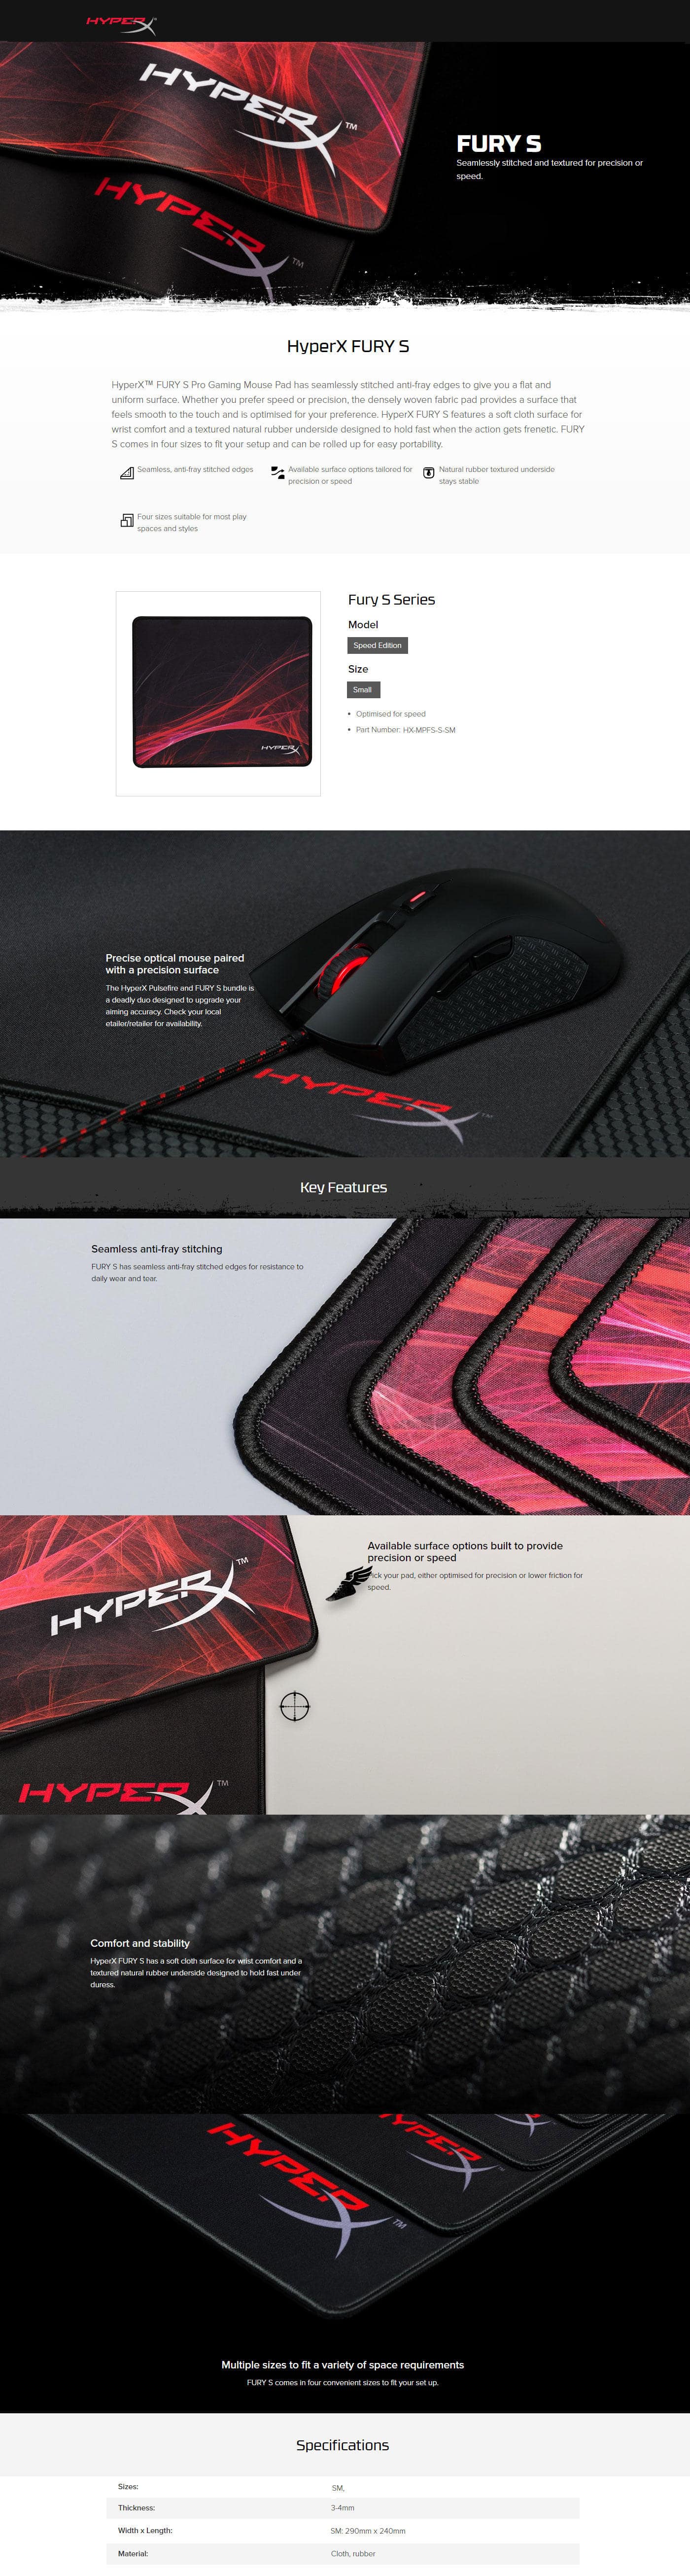  Buy Online HyperX FURY S Speed Edition Gaming Mouse Pad - Small (HX-MPFS-S-SM)